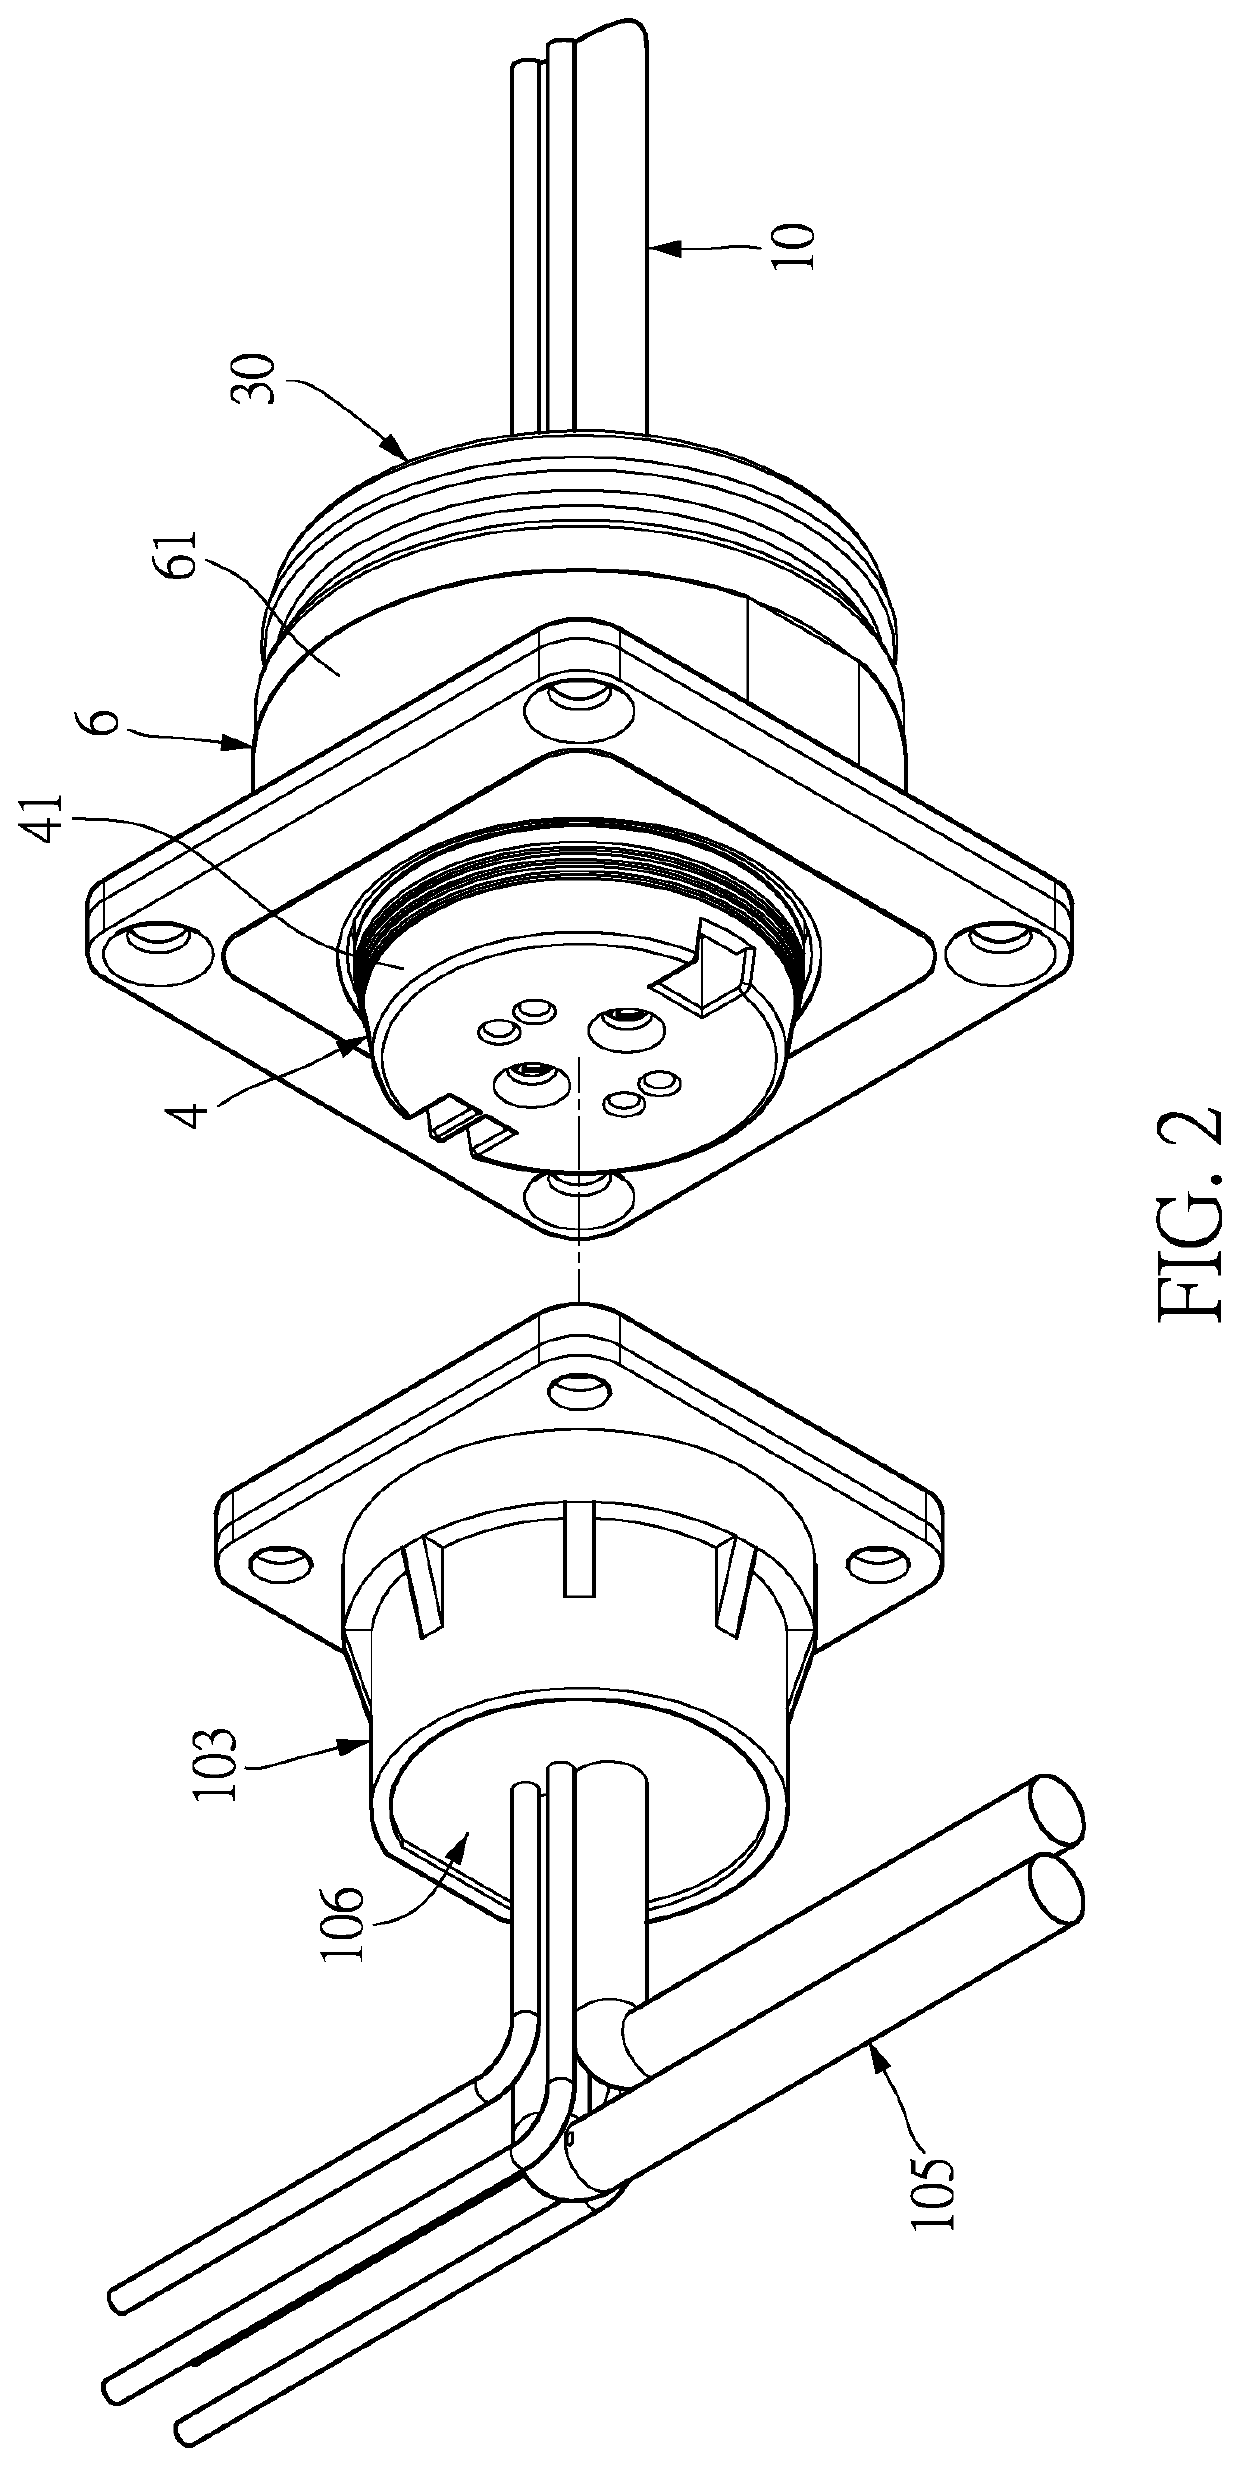 Connecting device and assembly of connecting device and mating device